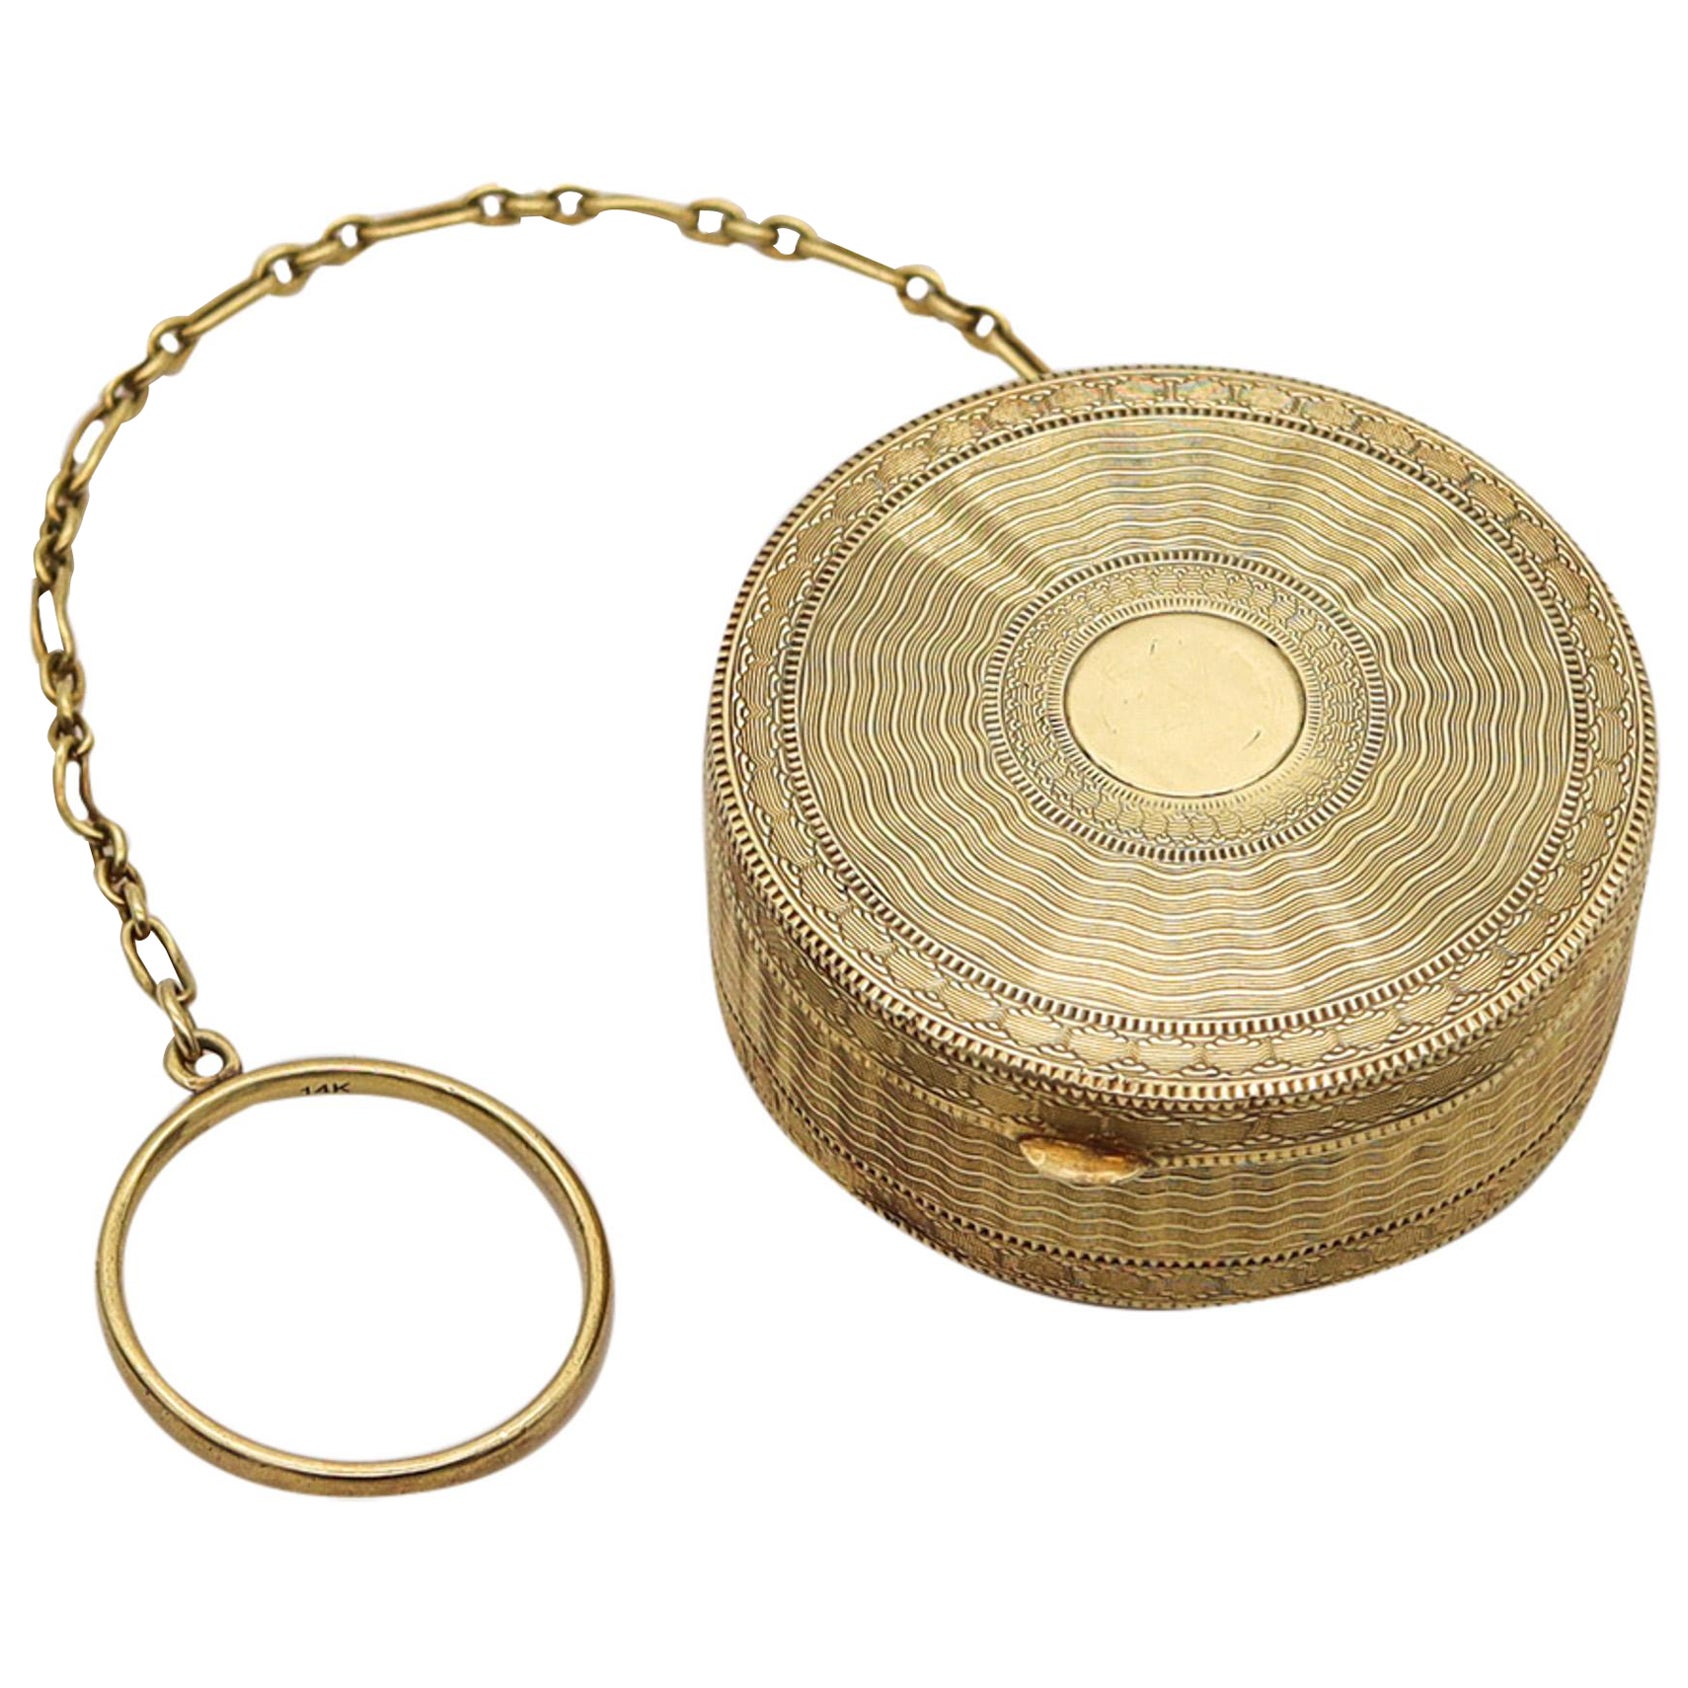 Tiffany & Co. 1910 Edwardian Guilloché Round Pill Box In 14Kt Yellow Gold For Sale